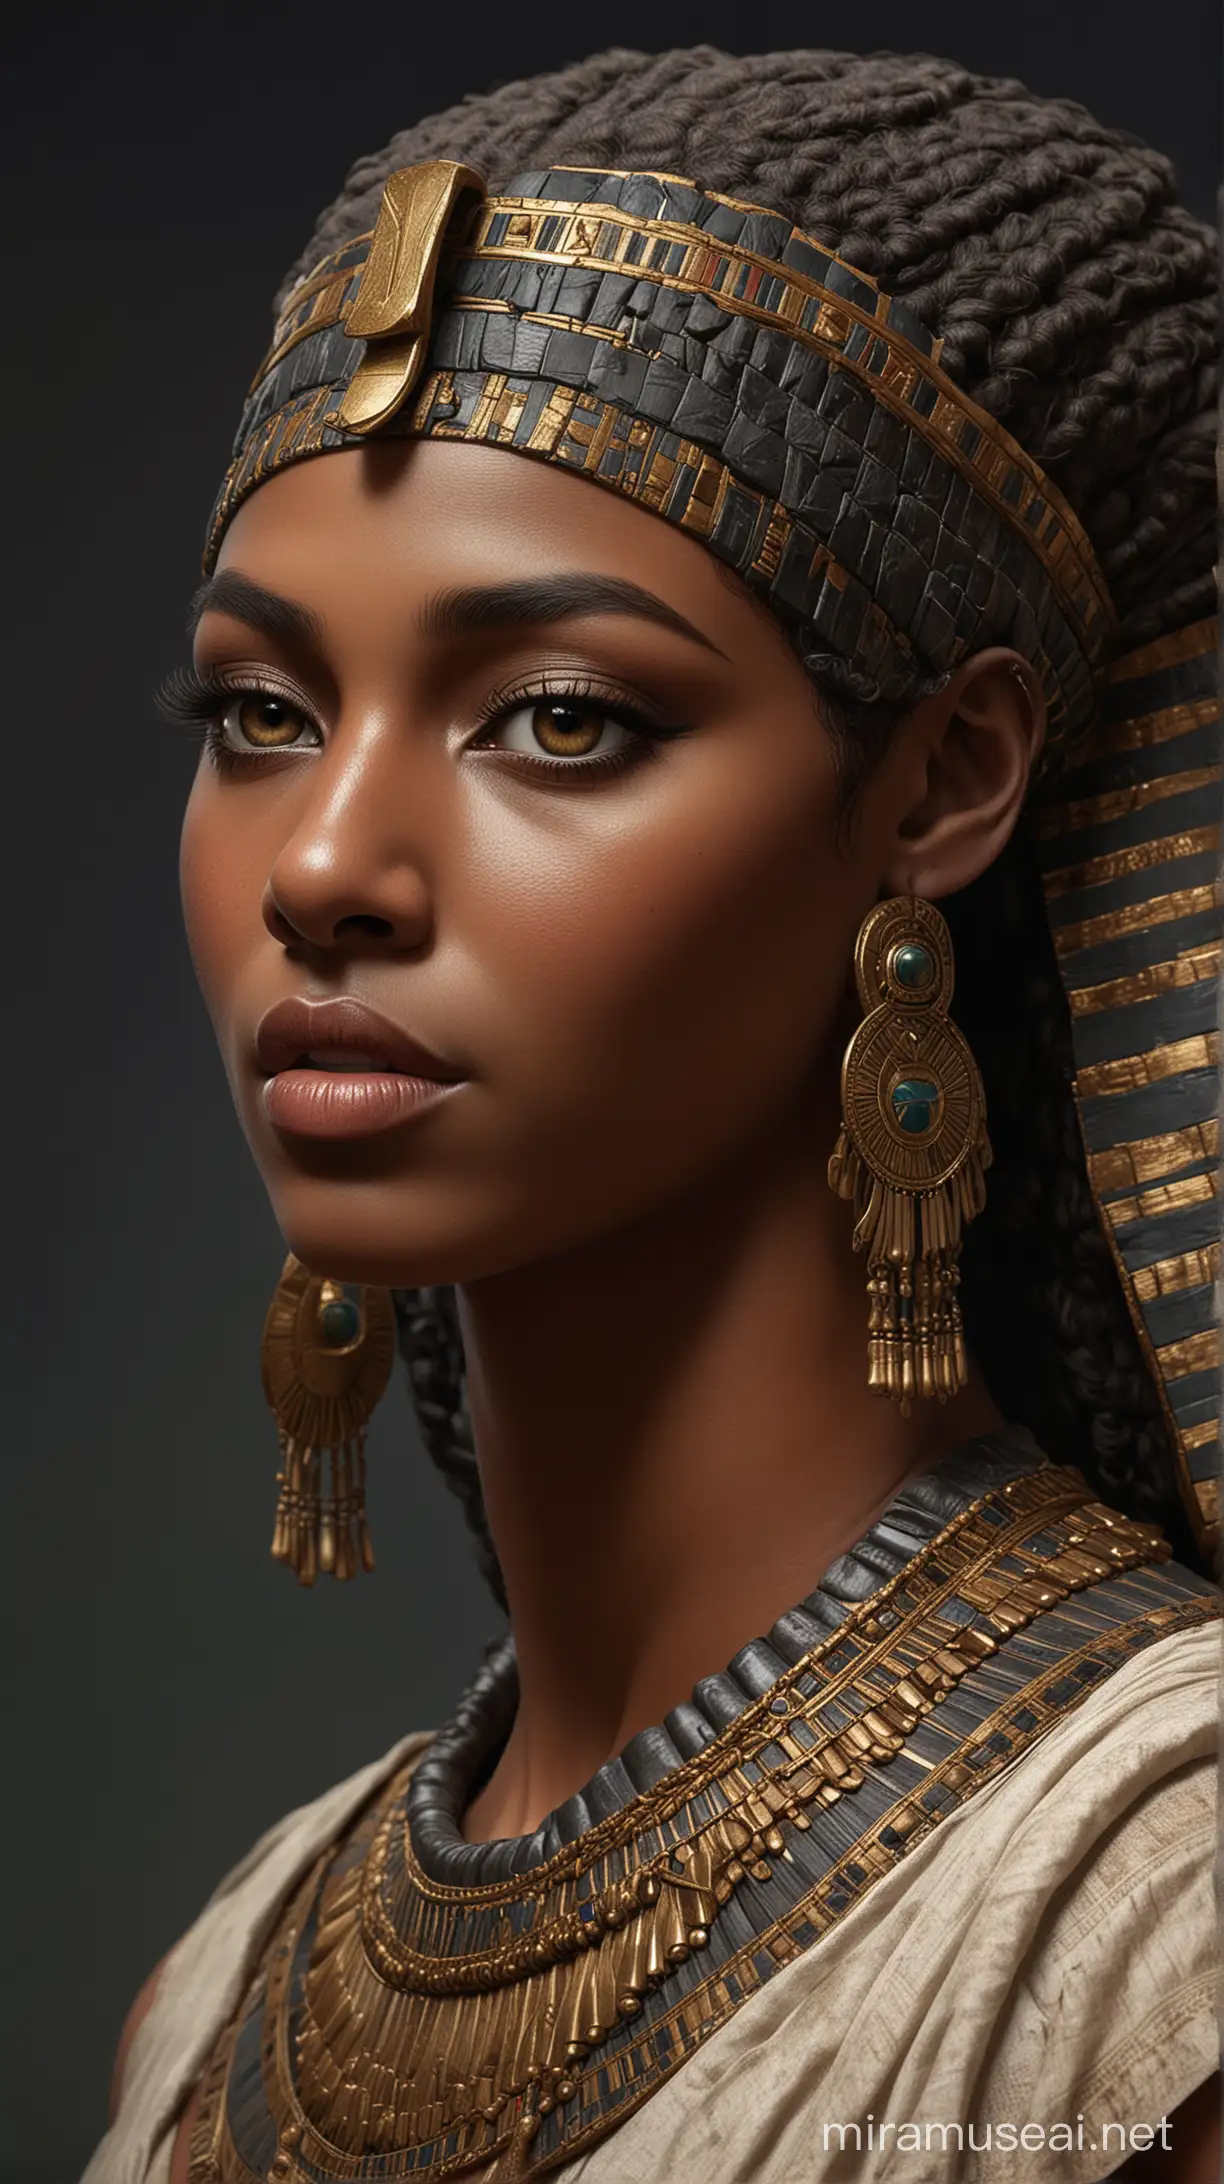 Hyperrealistic Depiction of Cleopatra with Dark Skin and African Features